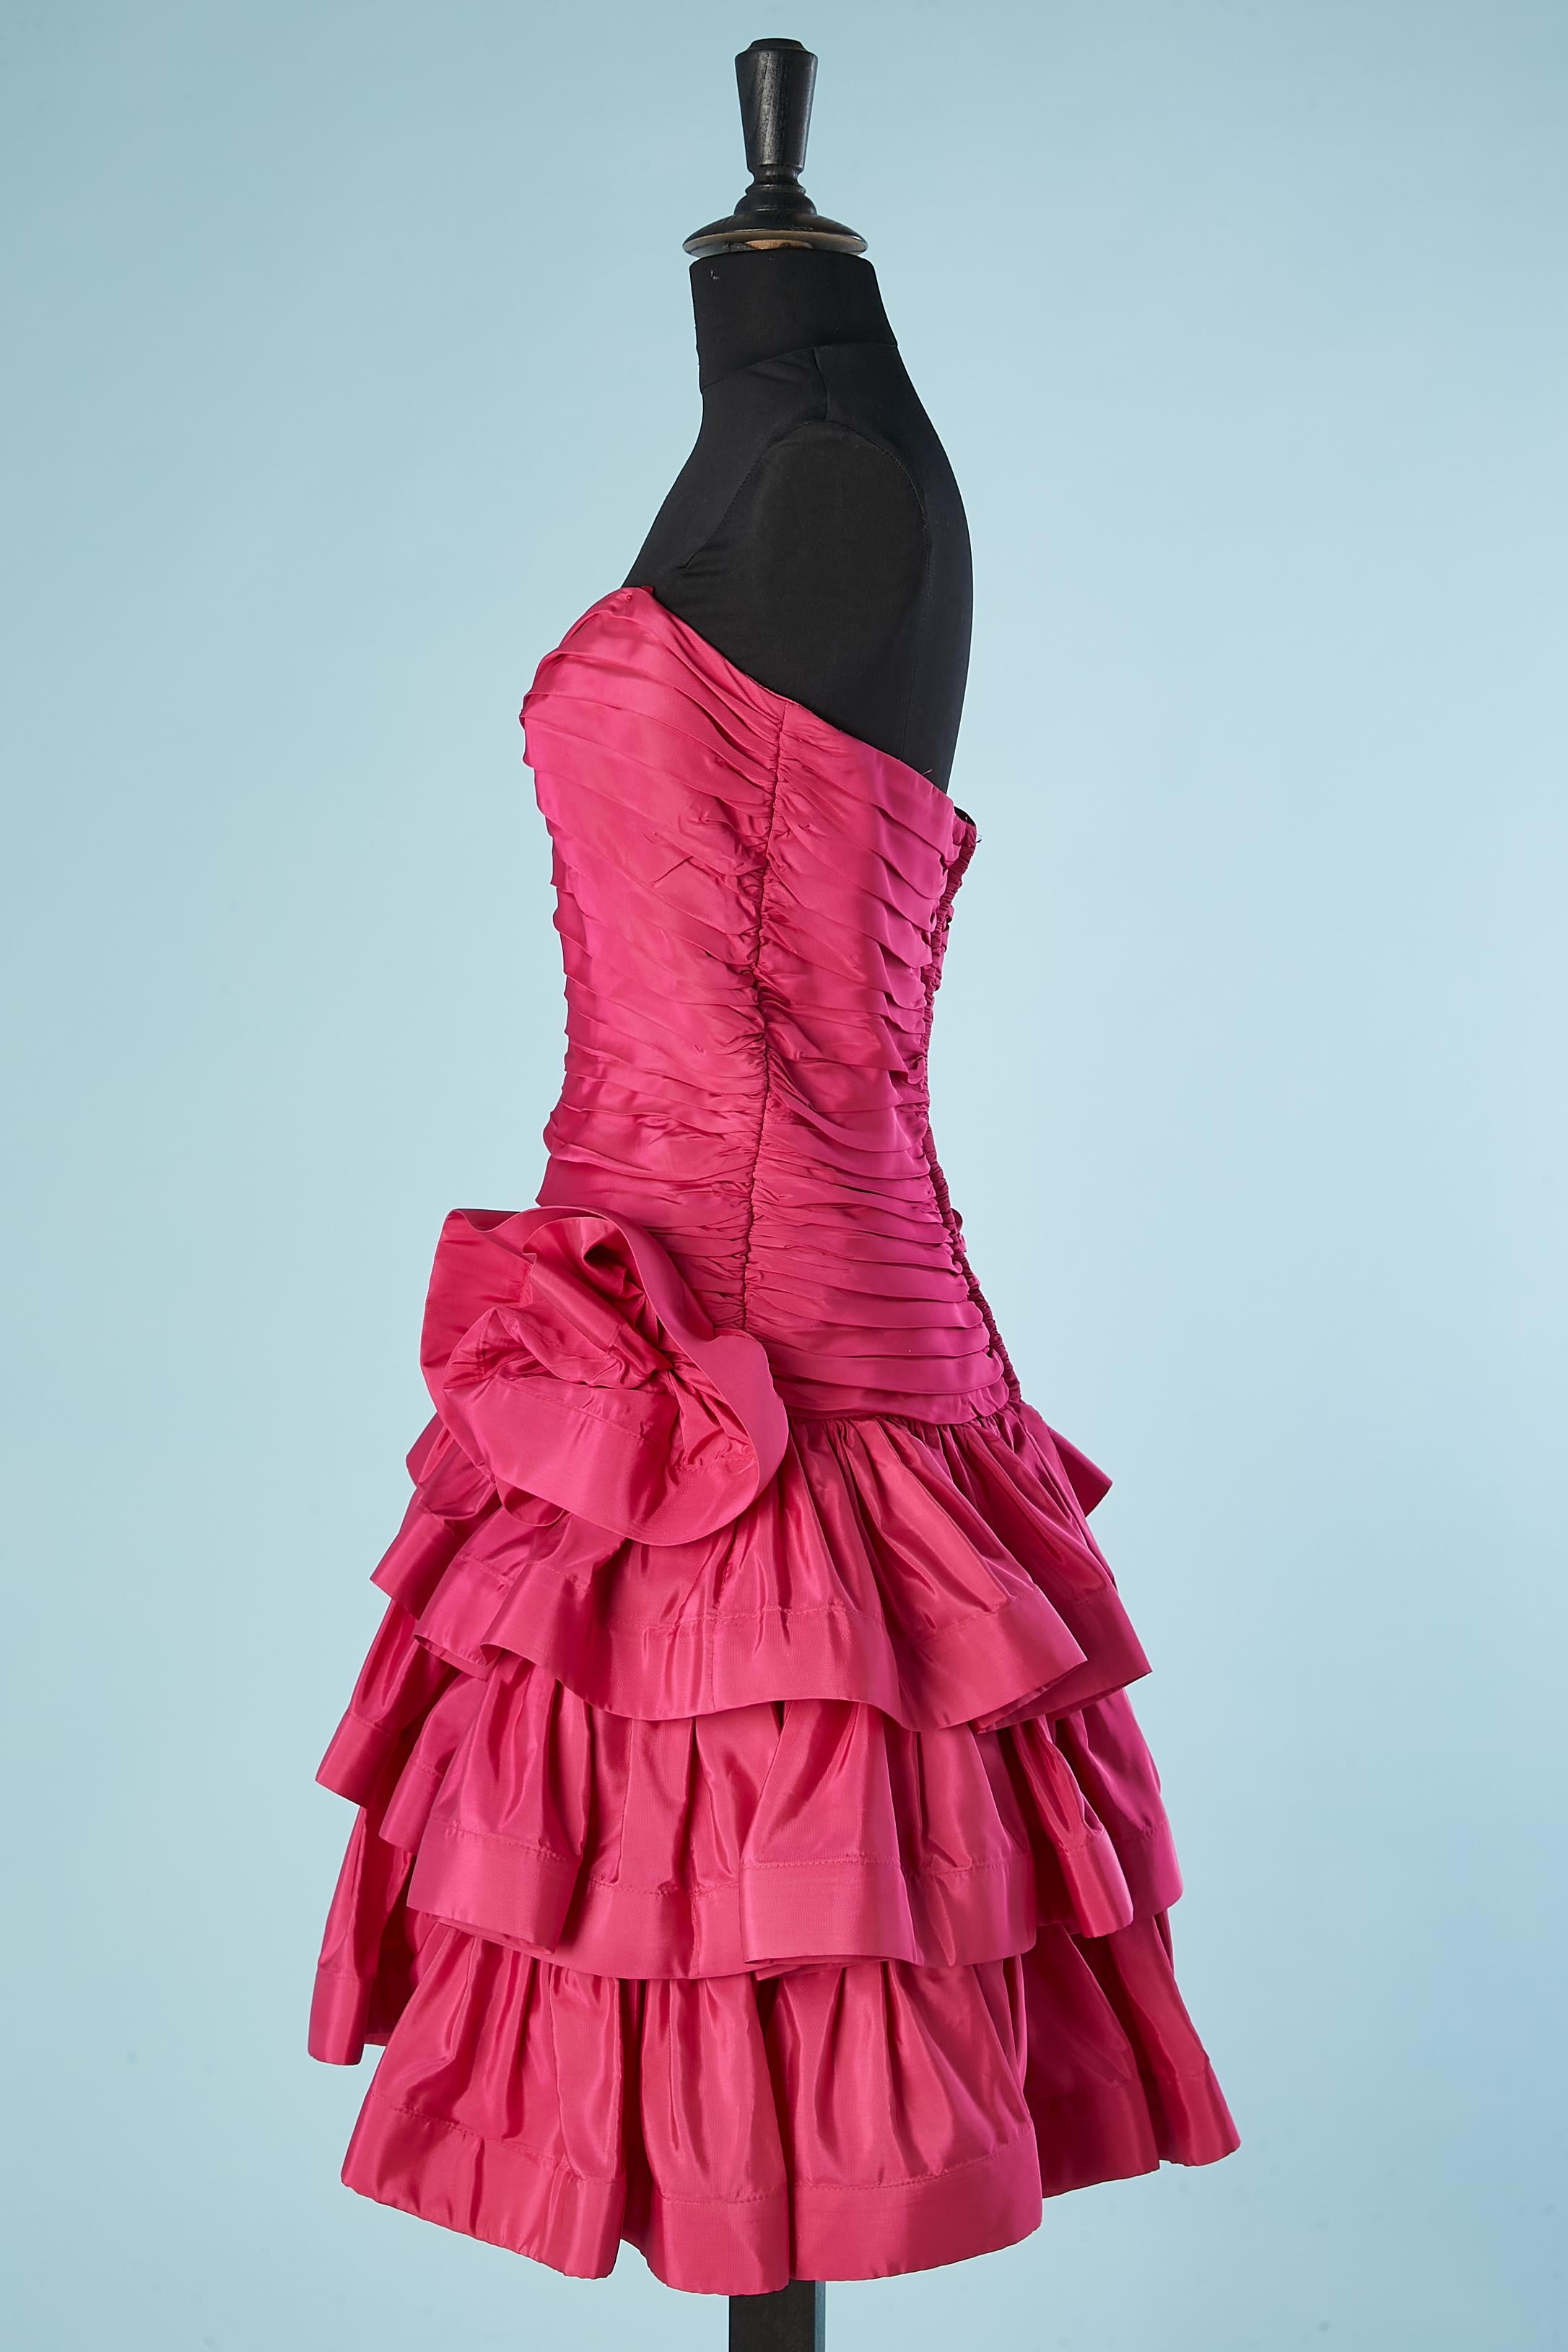 Women's Shocking pink draped cocktail dress with ruffles Lillie Rubin Circa 1980 For Sale